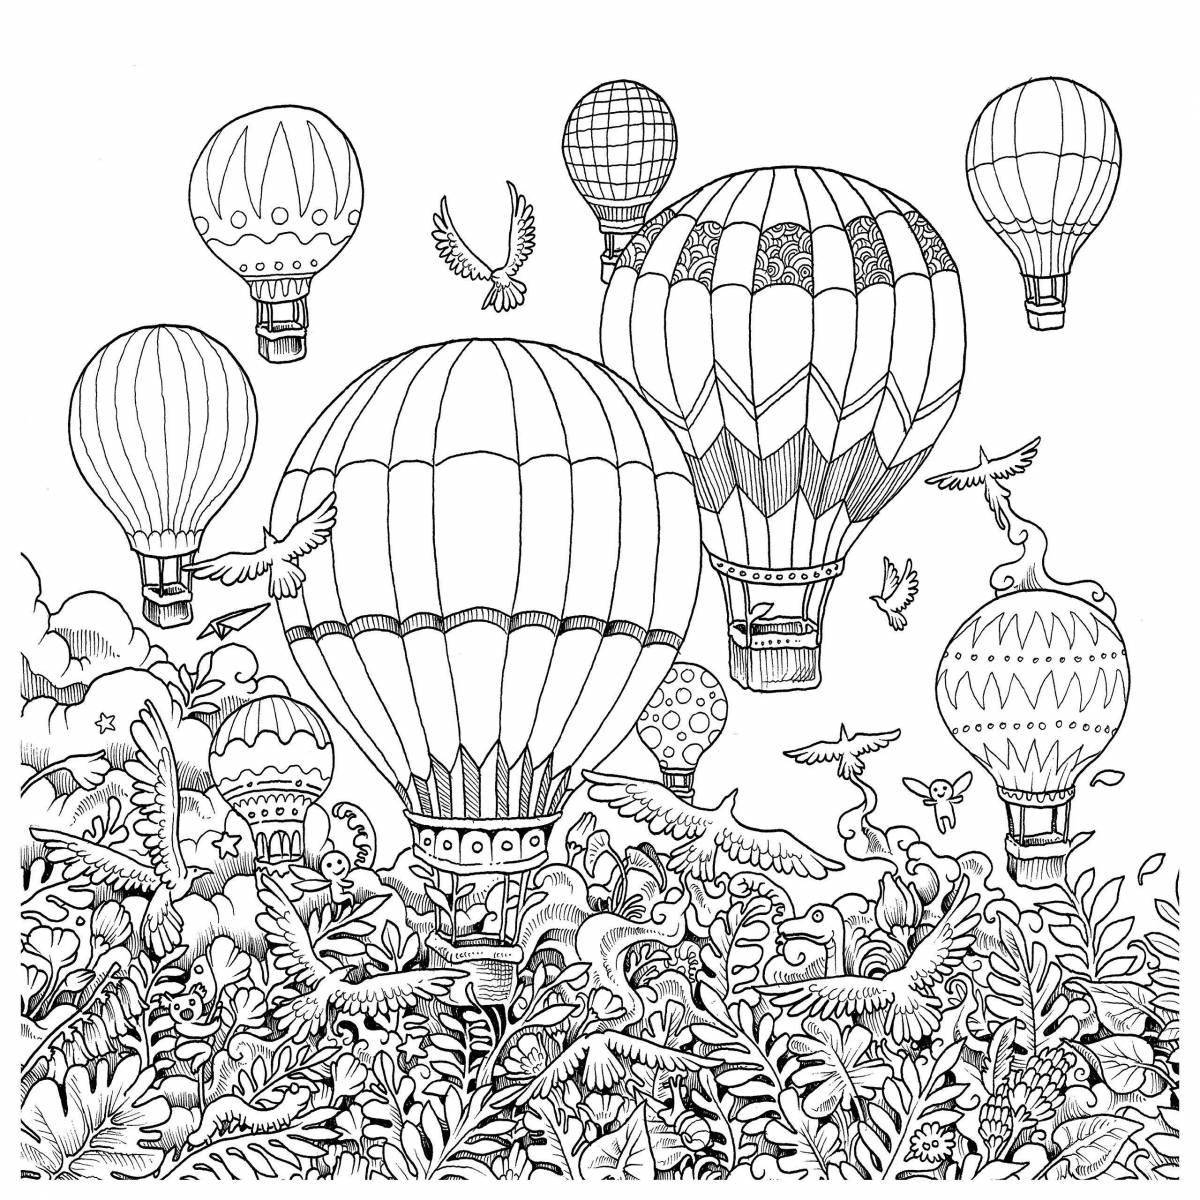 Charming travel coloring page